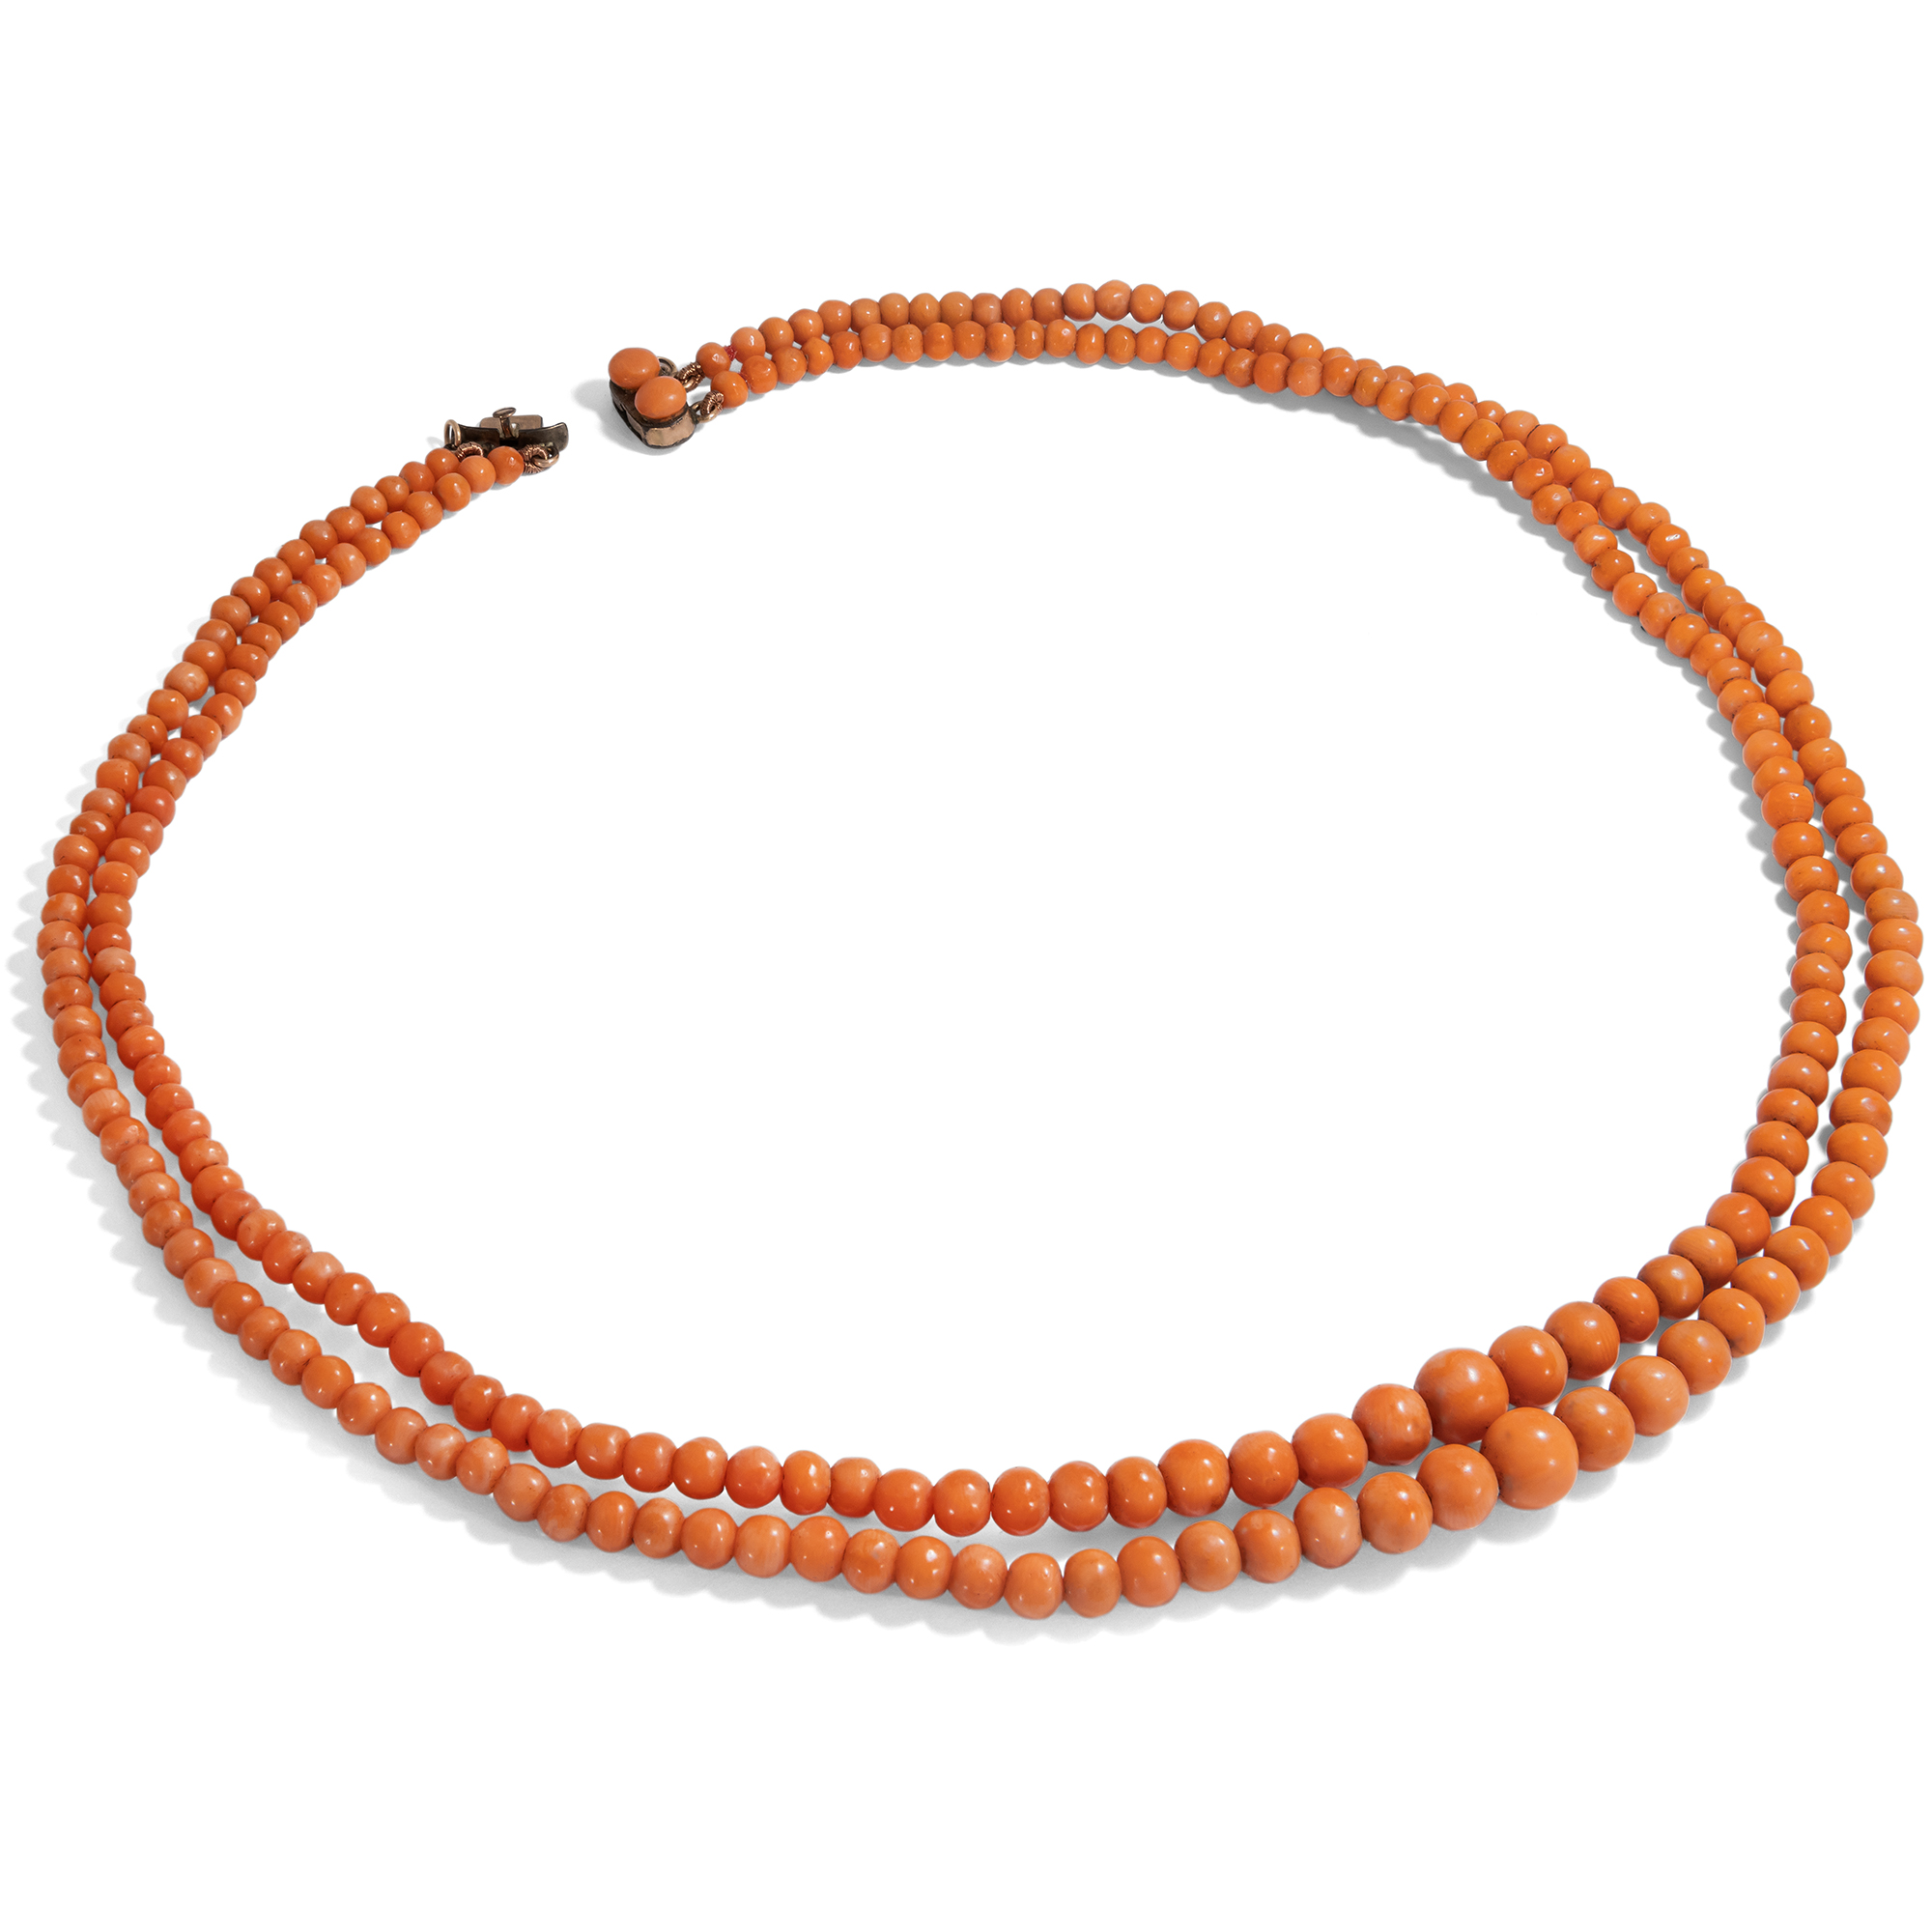 Antique Two-Row Salmon Coral Necklace, Italy ca. 1900